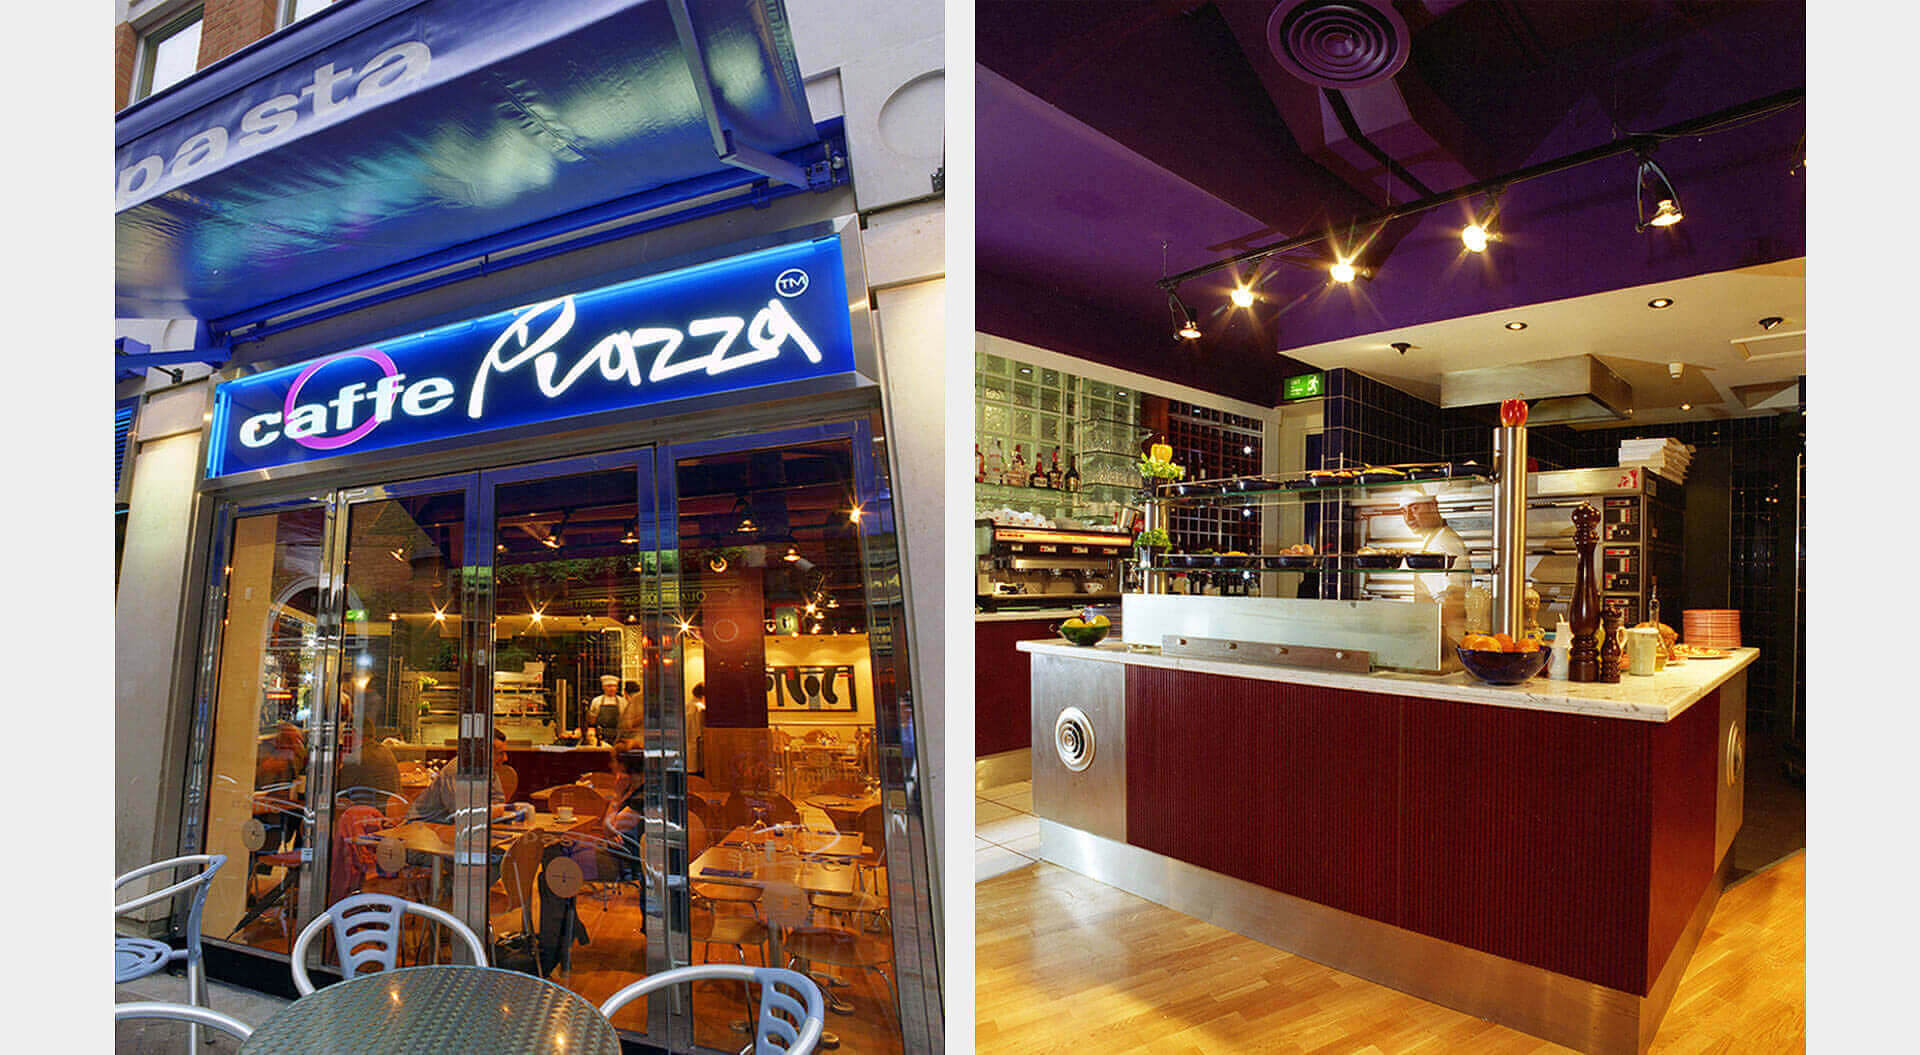 Caffe Piazza restaurant branding external seating and Chef's pizza preparation table and oven interior design 